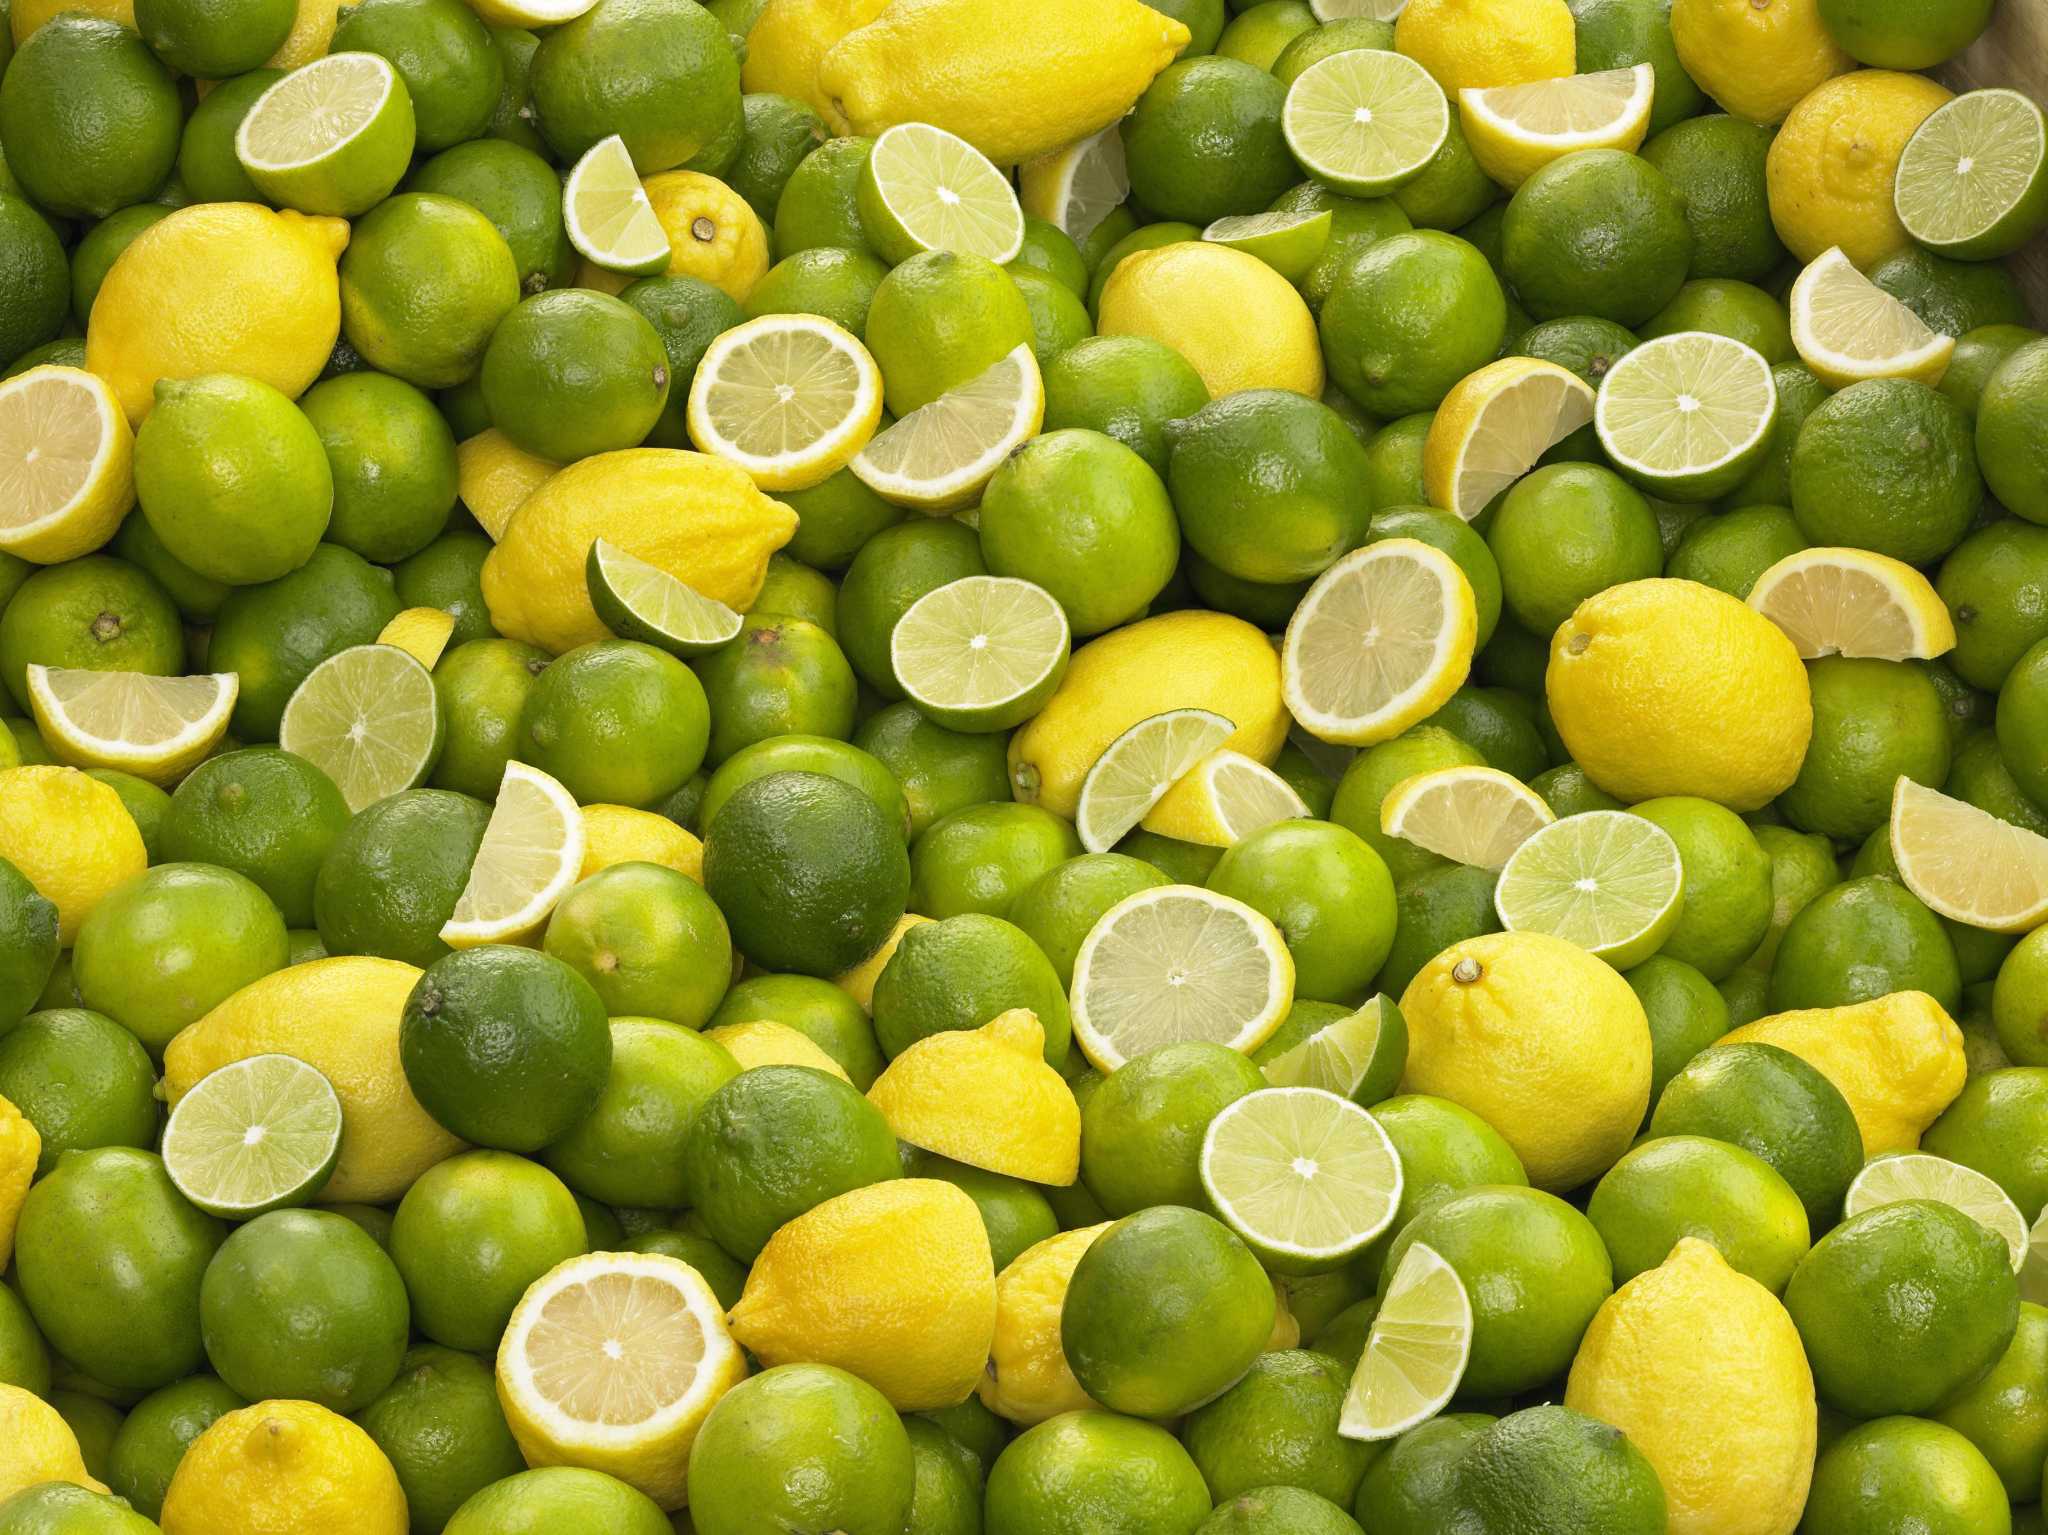 How To Pick And Select Juicy Limes And Lemons And Then Juice And Store